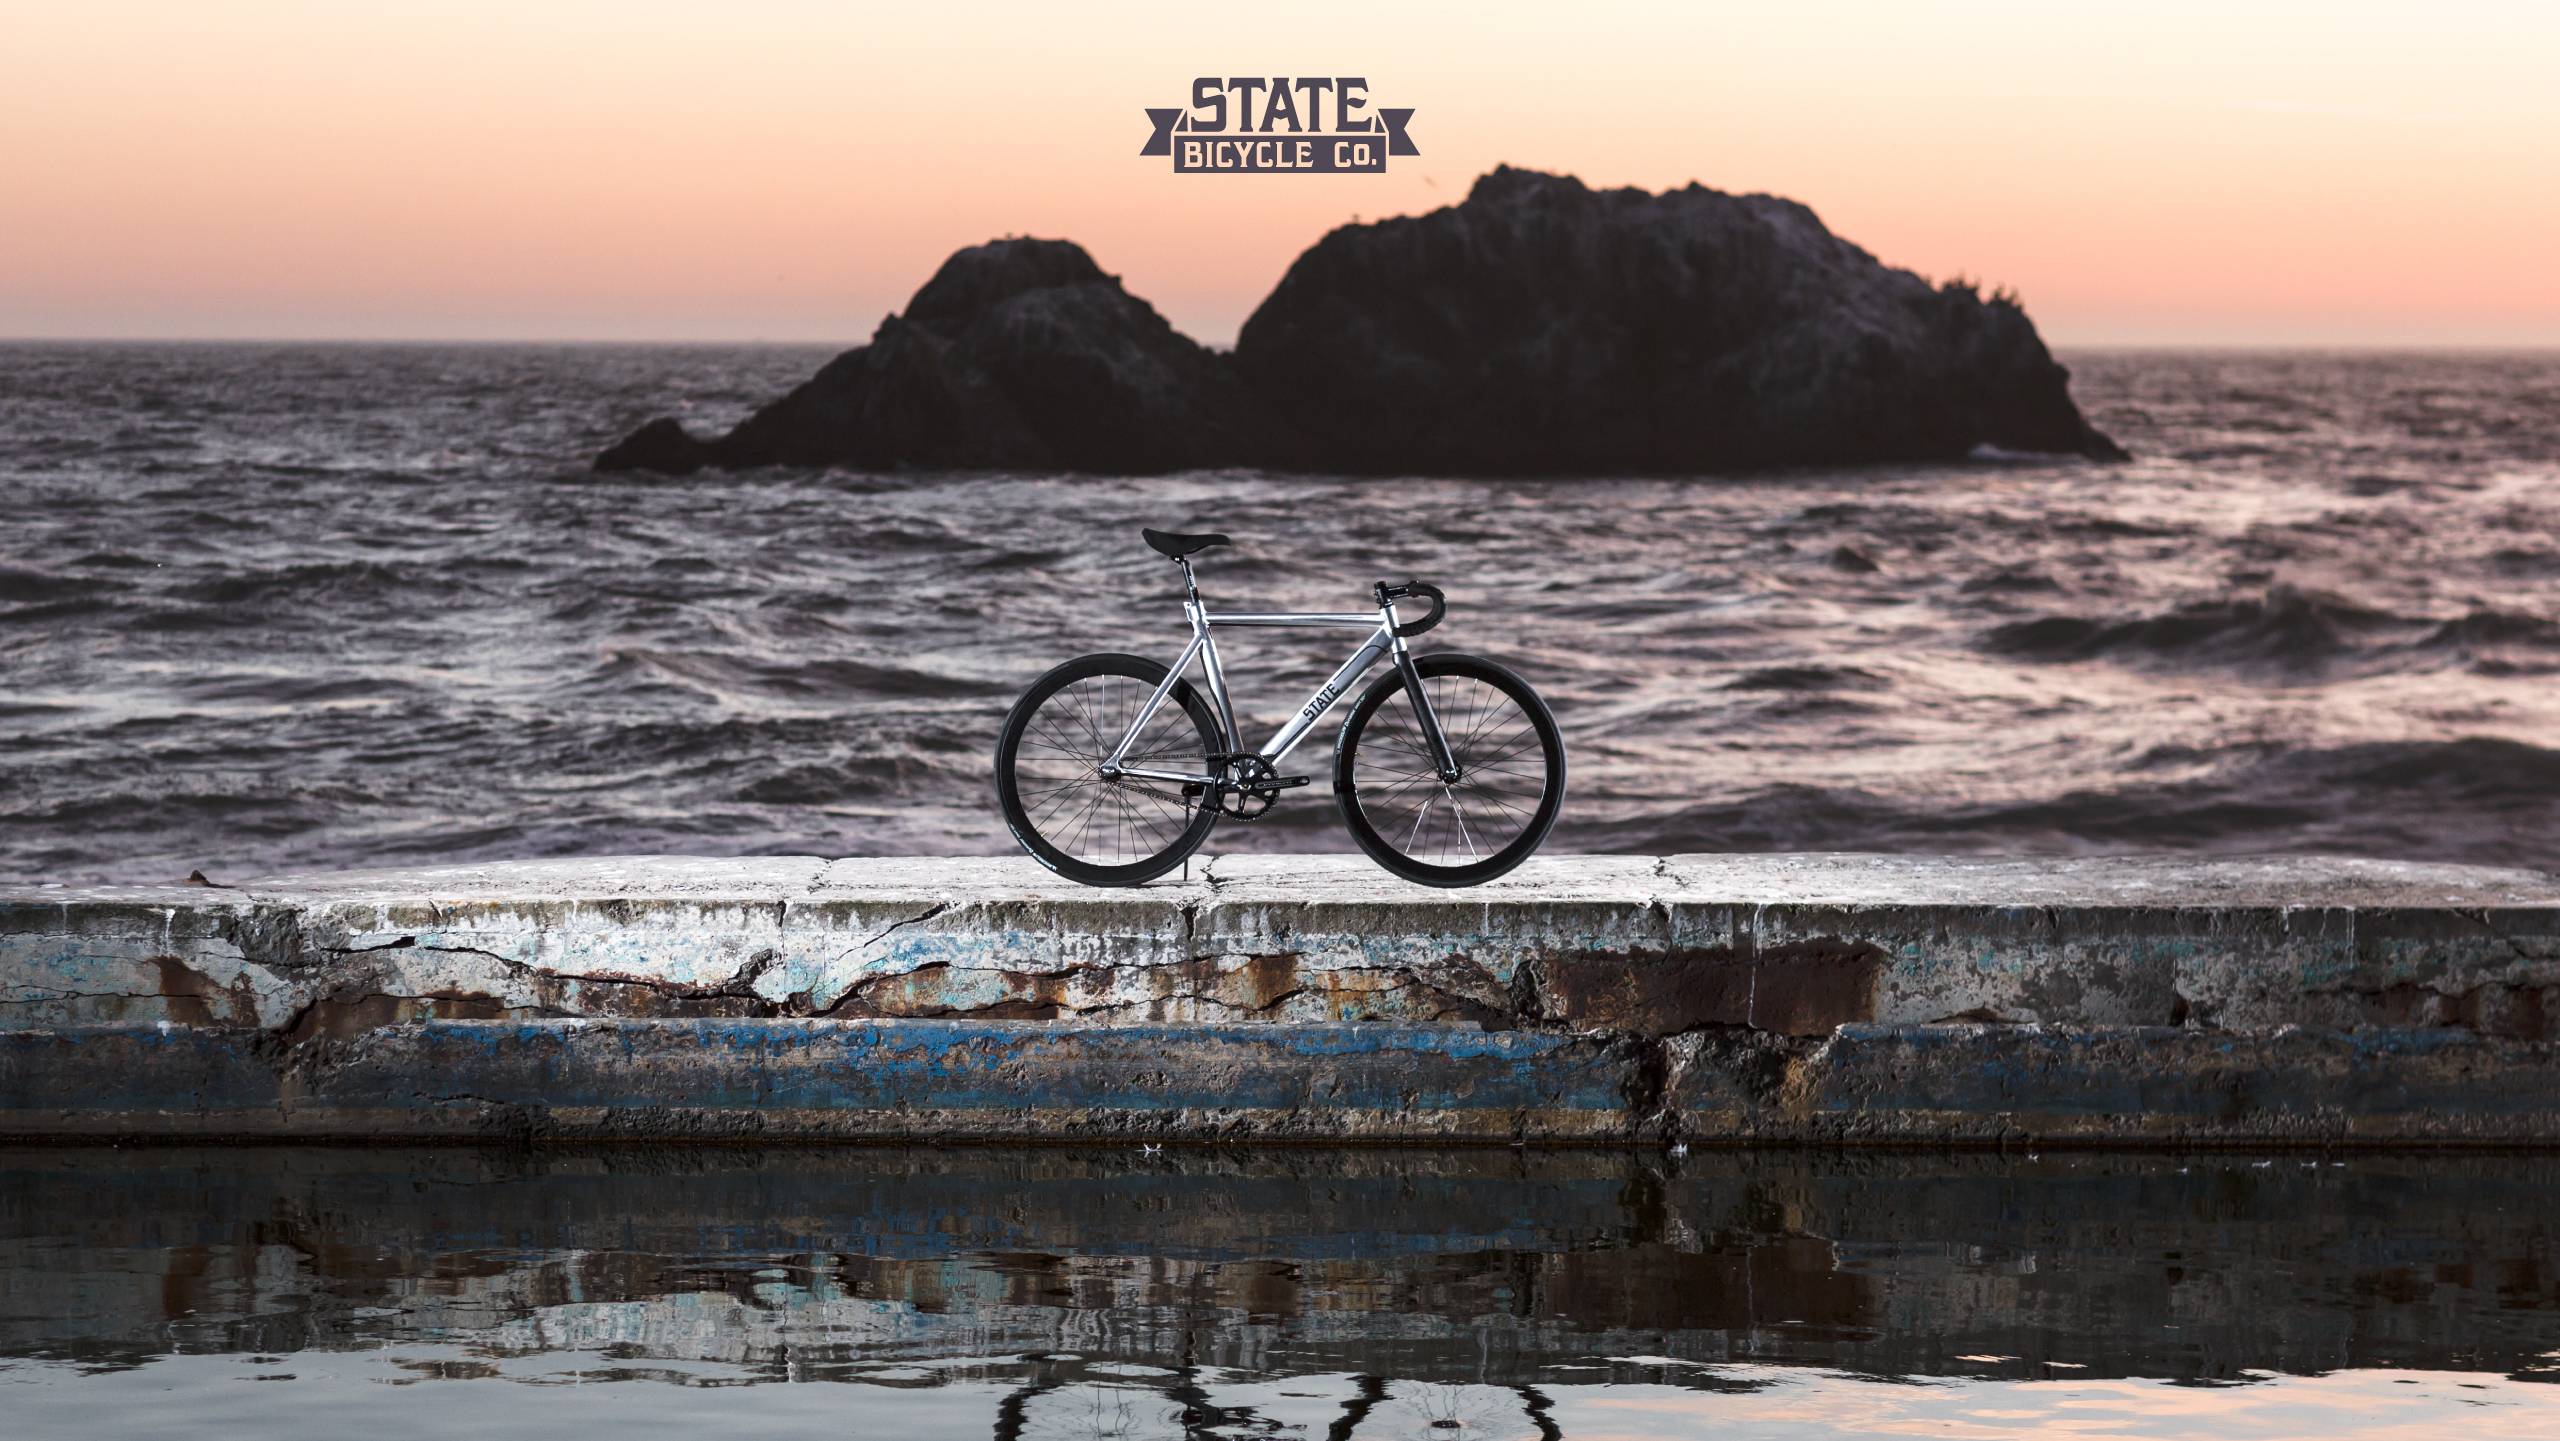 Every month new Fixed Gear Wallpaper Gear Europe